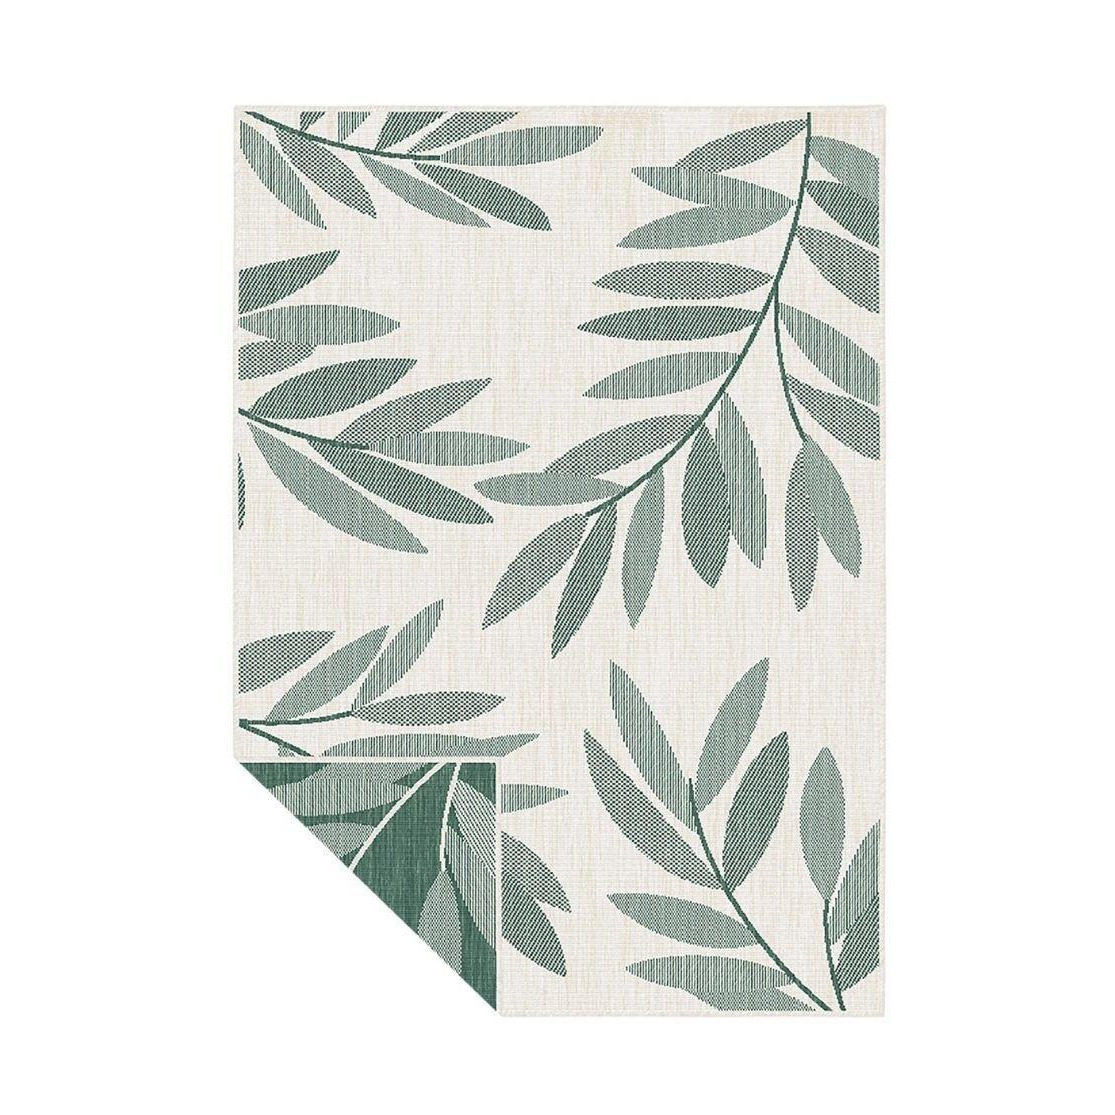 Duo Weave Collection Outdoor Rugs in Trailing Leaves Design - image 1